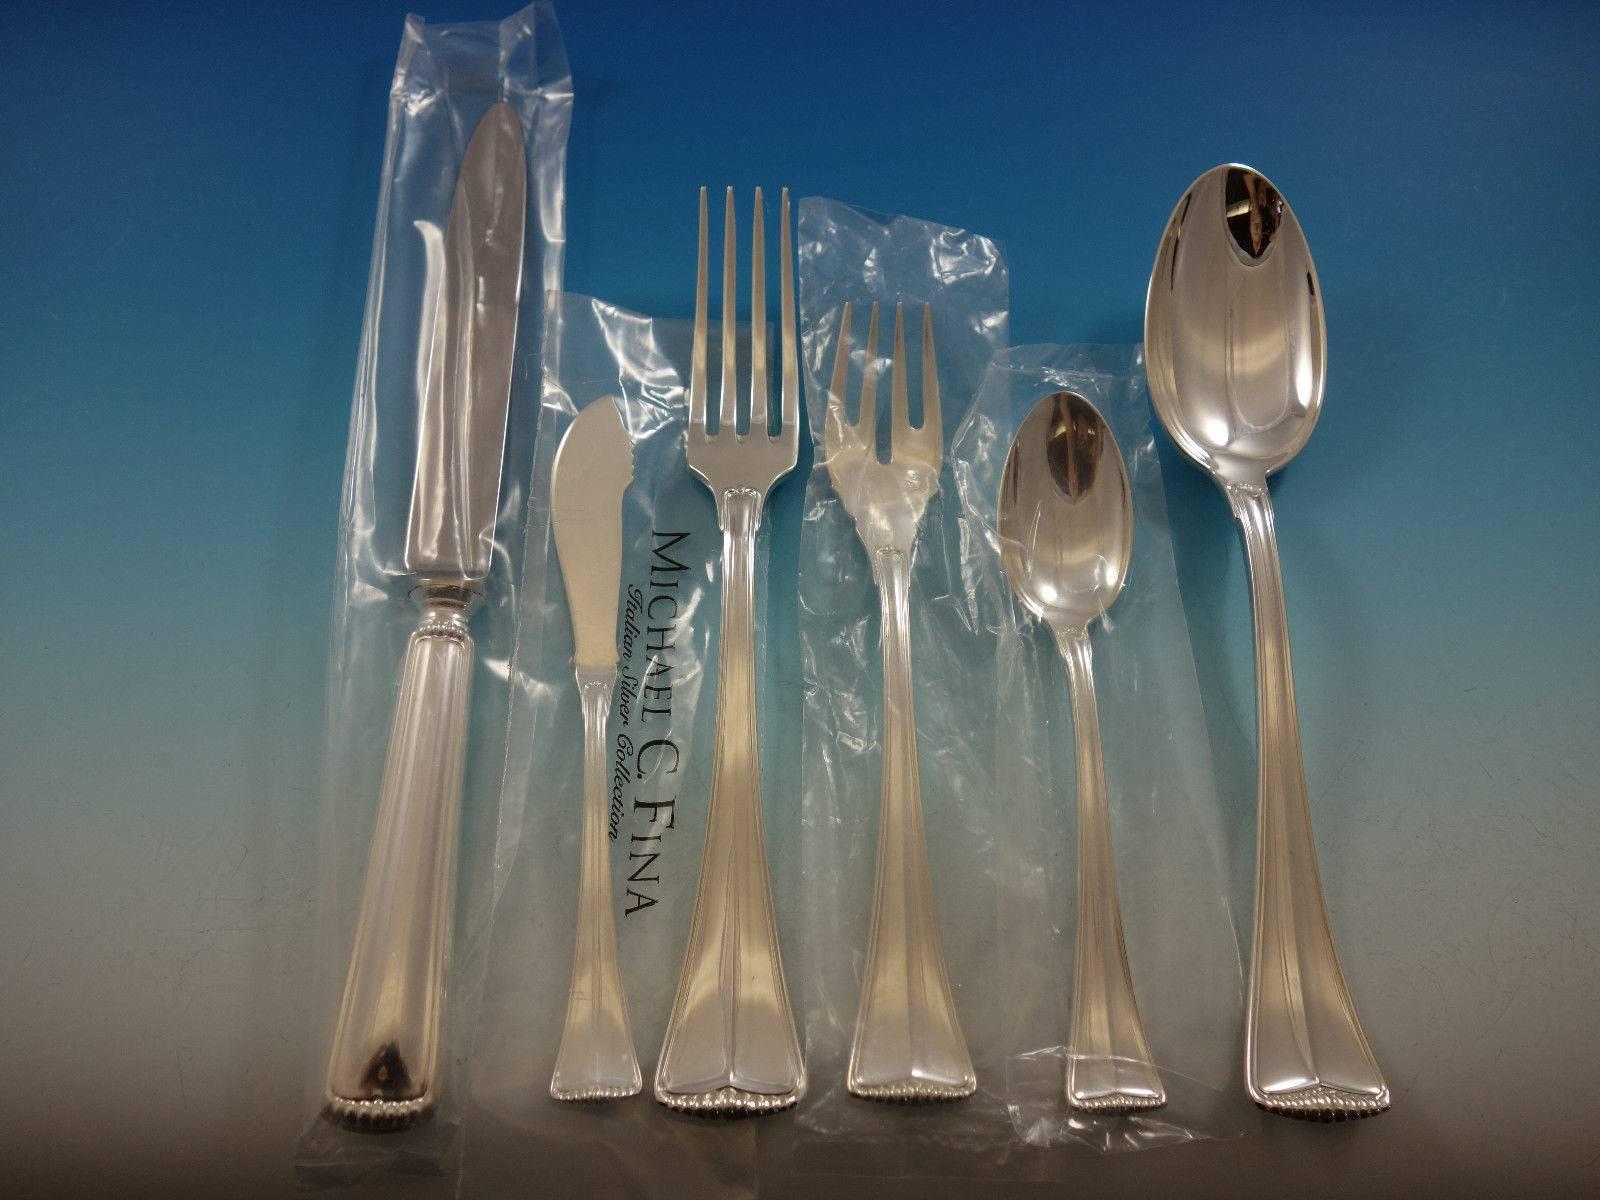 This Italian collection flatware is large and heavy European size, meticulously crafted in Italy of the finest silver. Fiesole by Greggio, retailed by Michael C Fina, Italian sterling silver flatware set - 56 pieces. This set is in pristine, unused